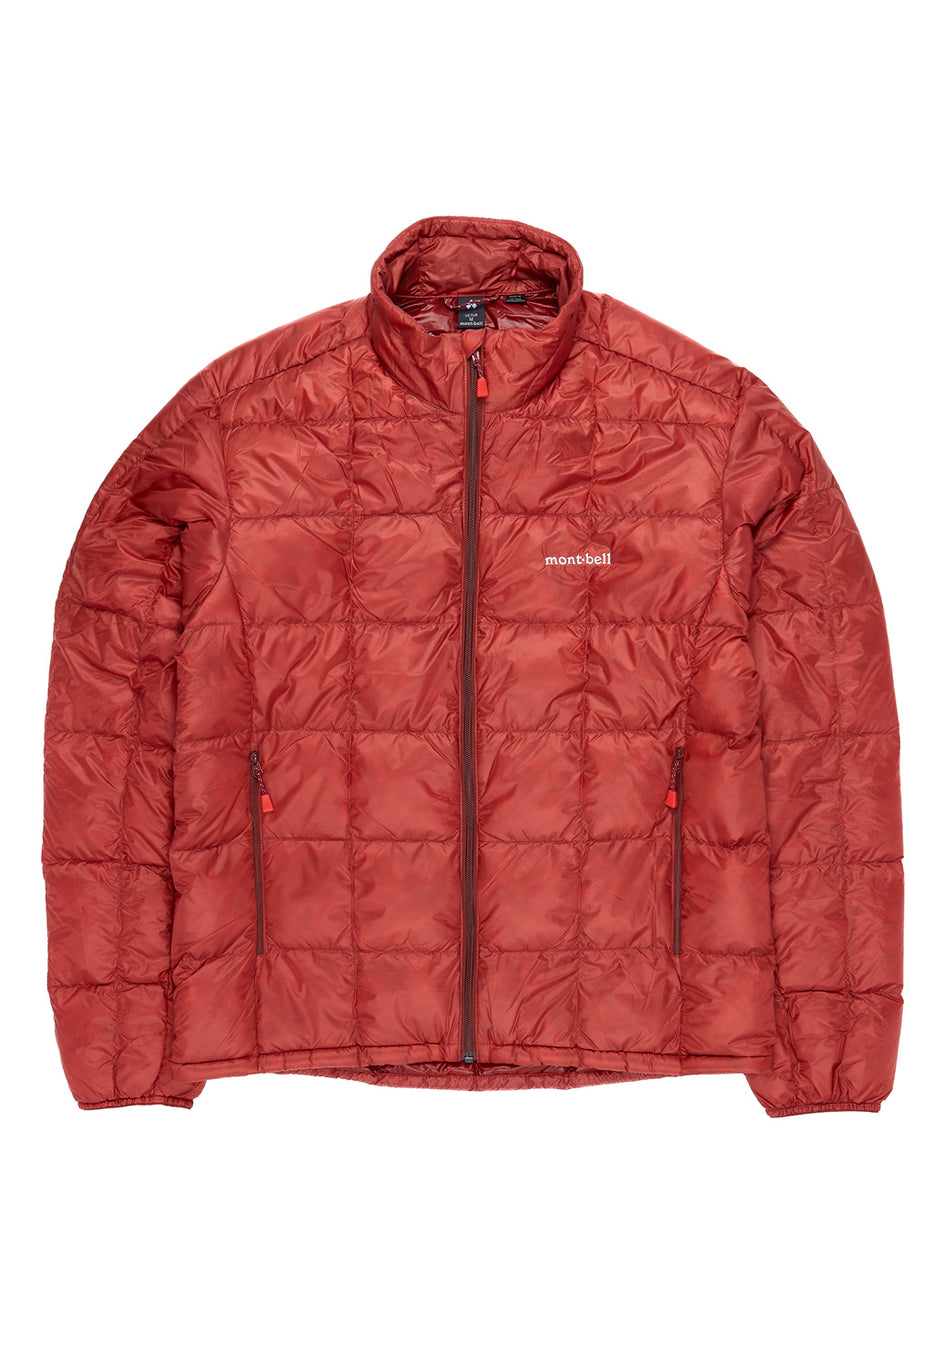 Montbell Men's Superior Down Jacket - Red